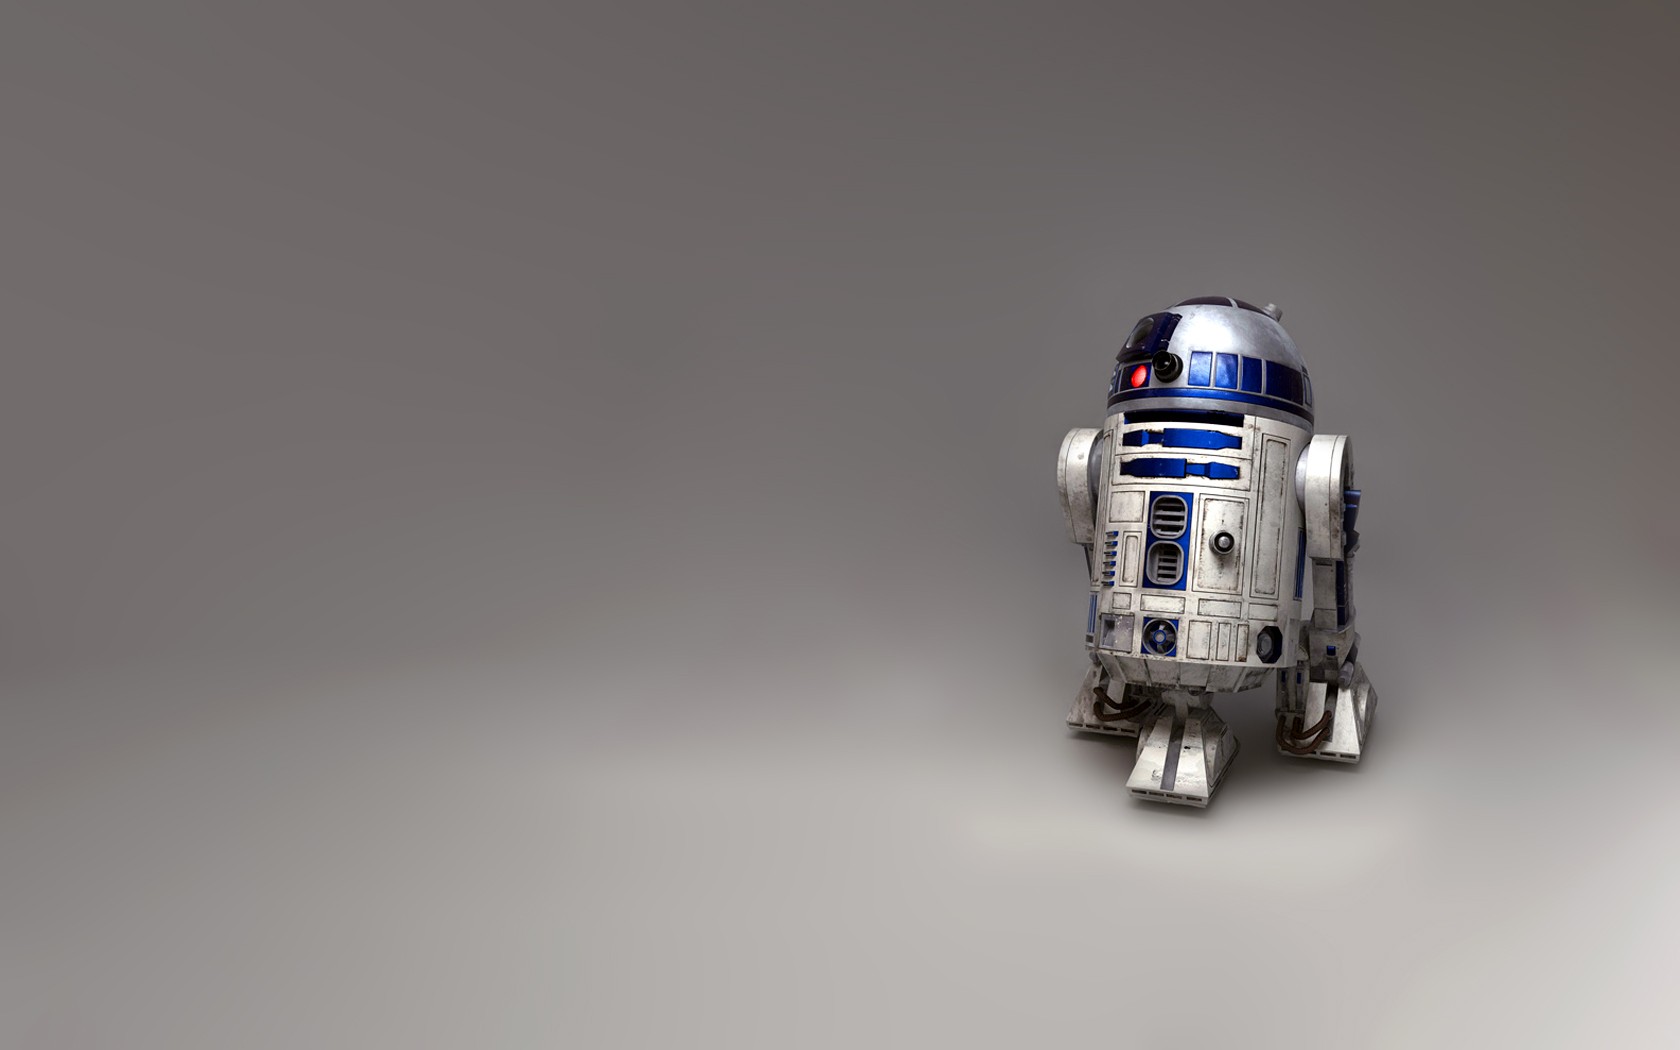 General 1680x1050 Star Wars R2-D2 Star Wars Droids science fiction simple background Star Wars Heroes